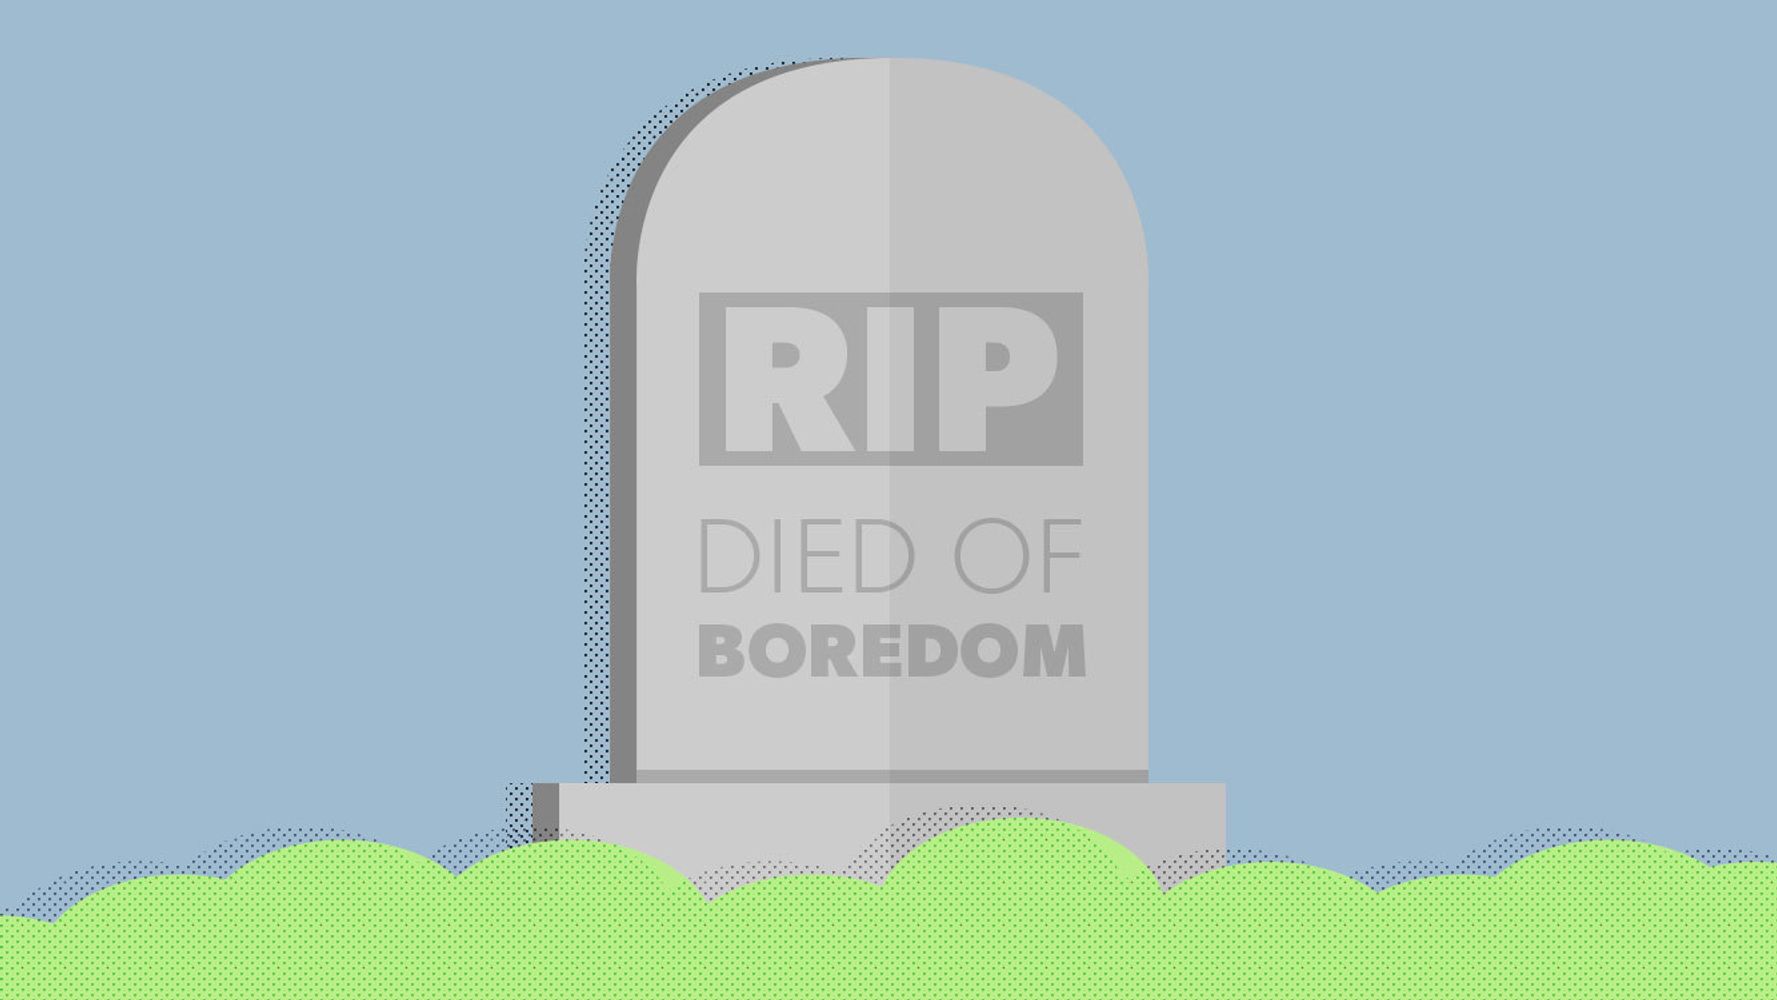 My Websites to Cure Boredom Parts 1-15 